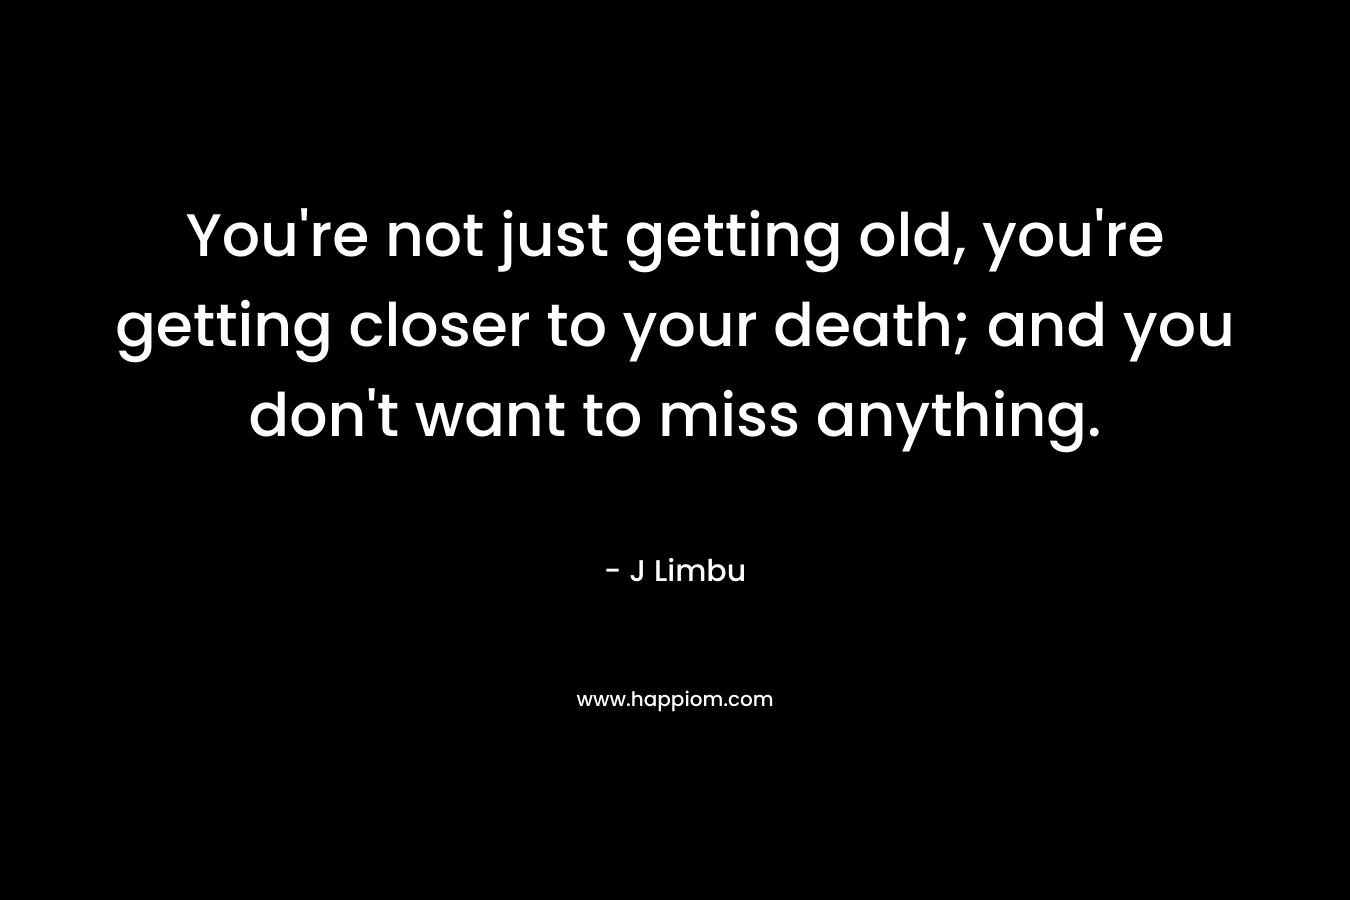 You're not just getting old, you're getting closer to your death; and you don't want to miss anything.